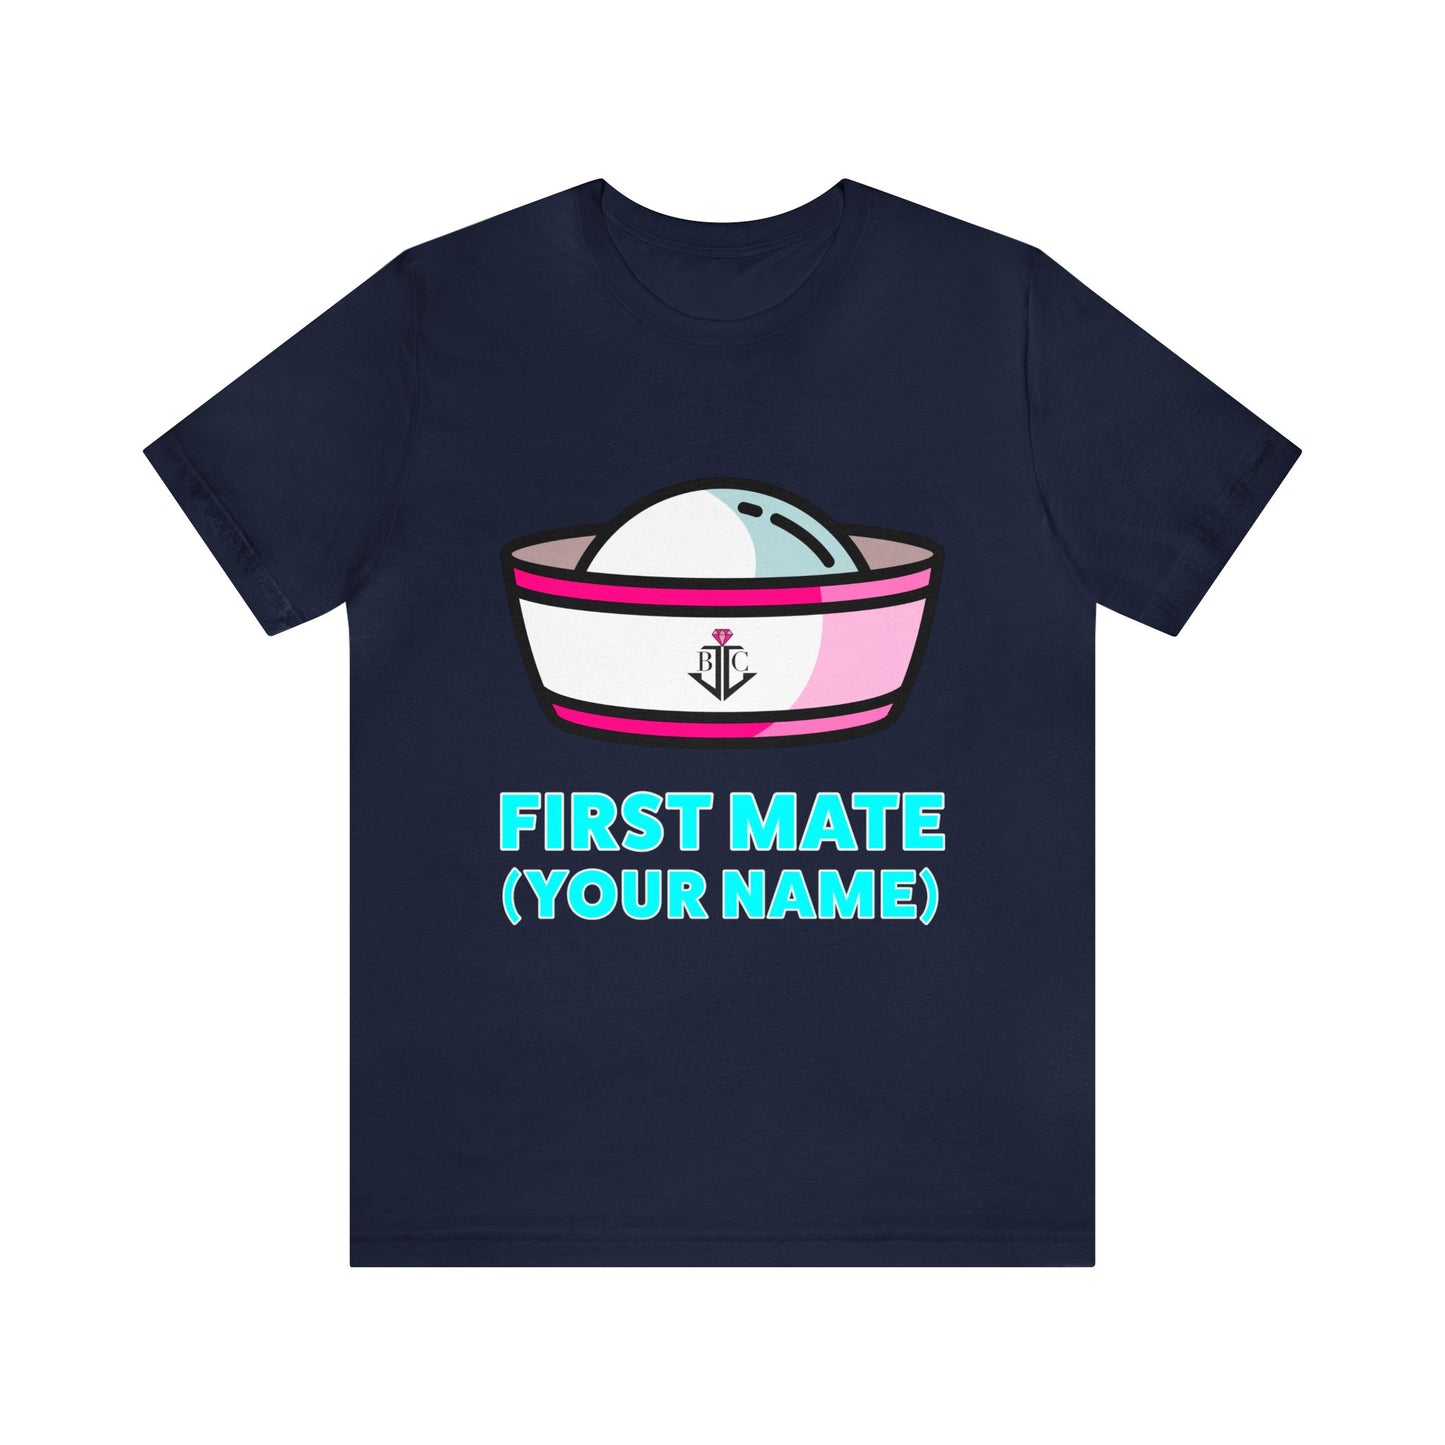 First Mate (Your Name) Custom–Unisex Lightweight Fashion Tee–EXPRESS DELIVERY*